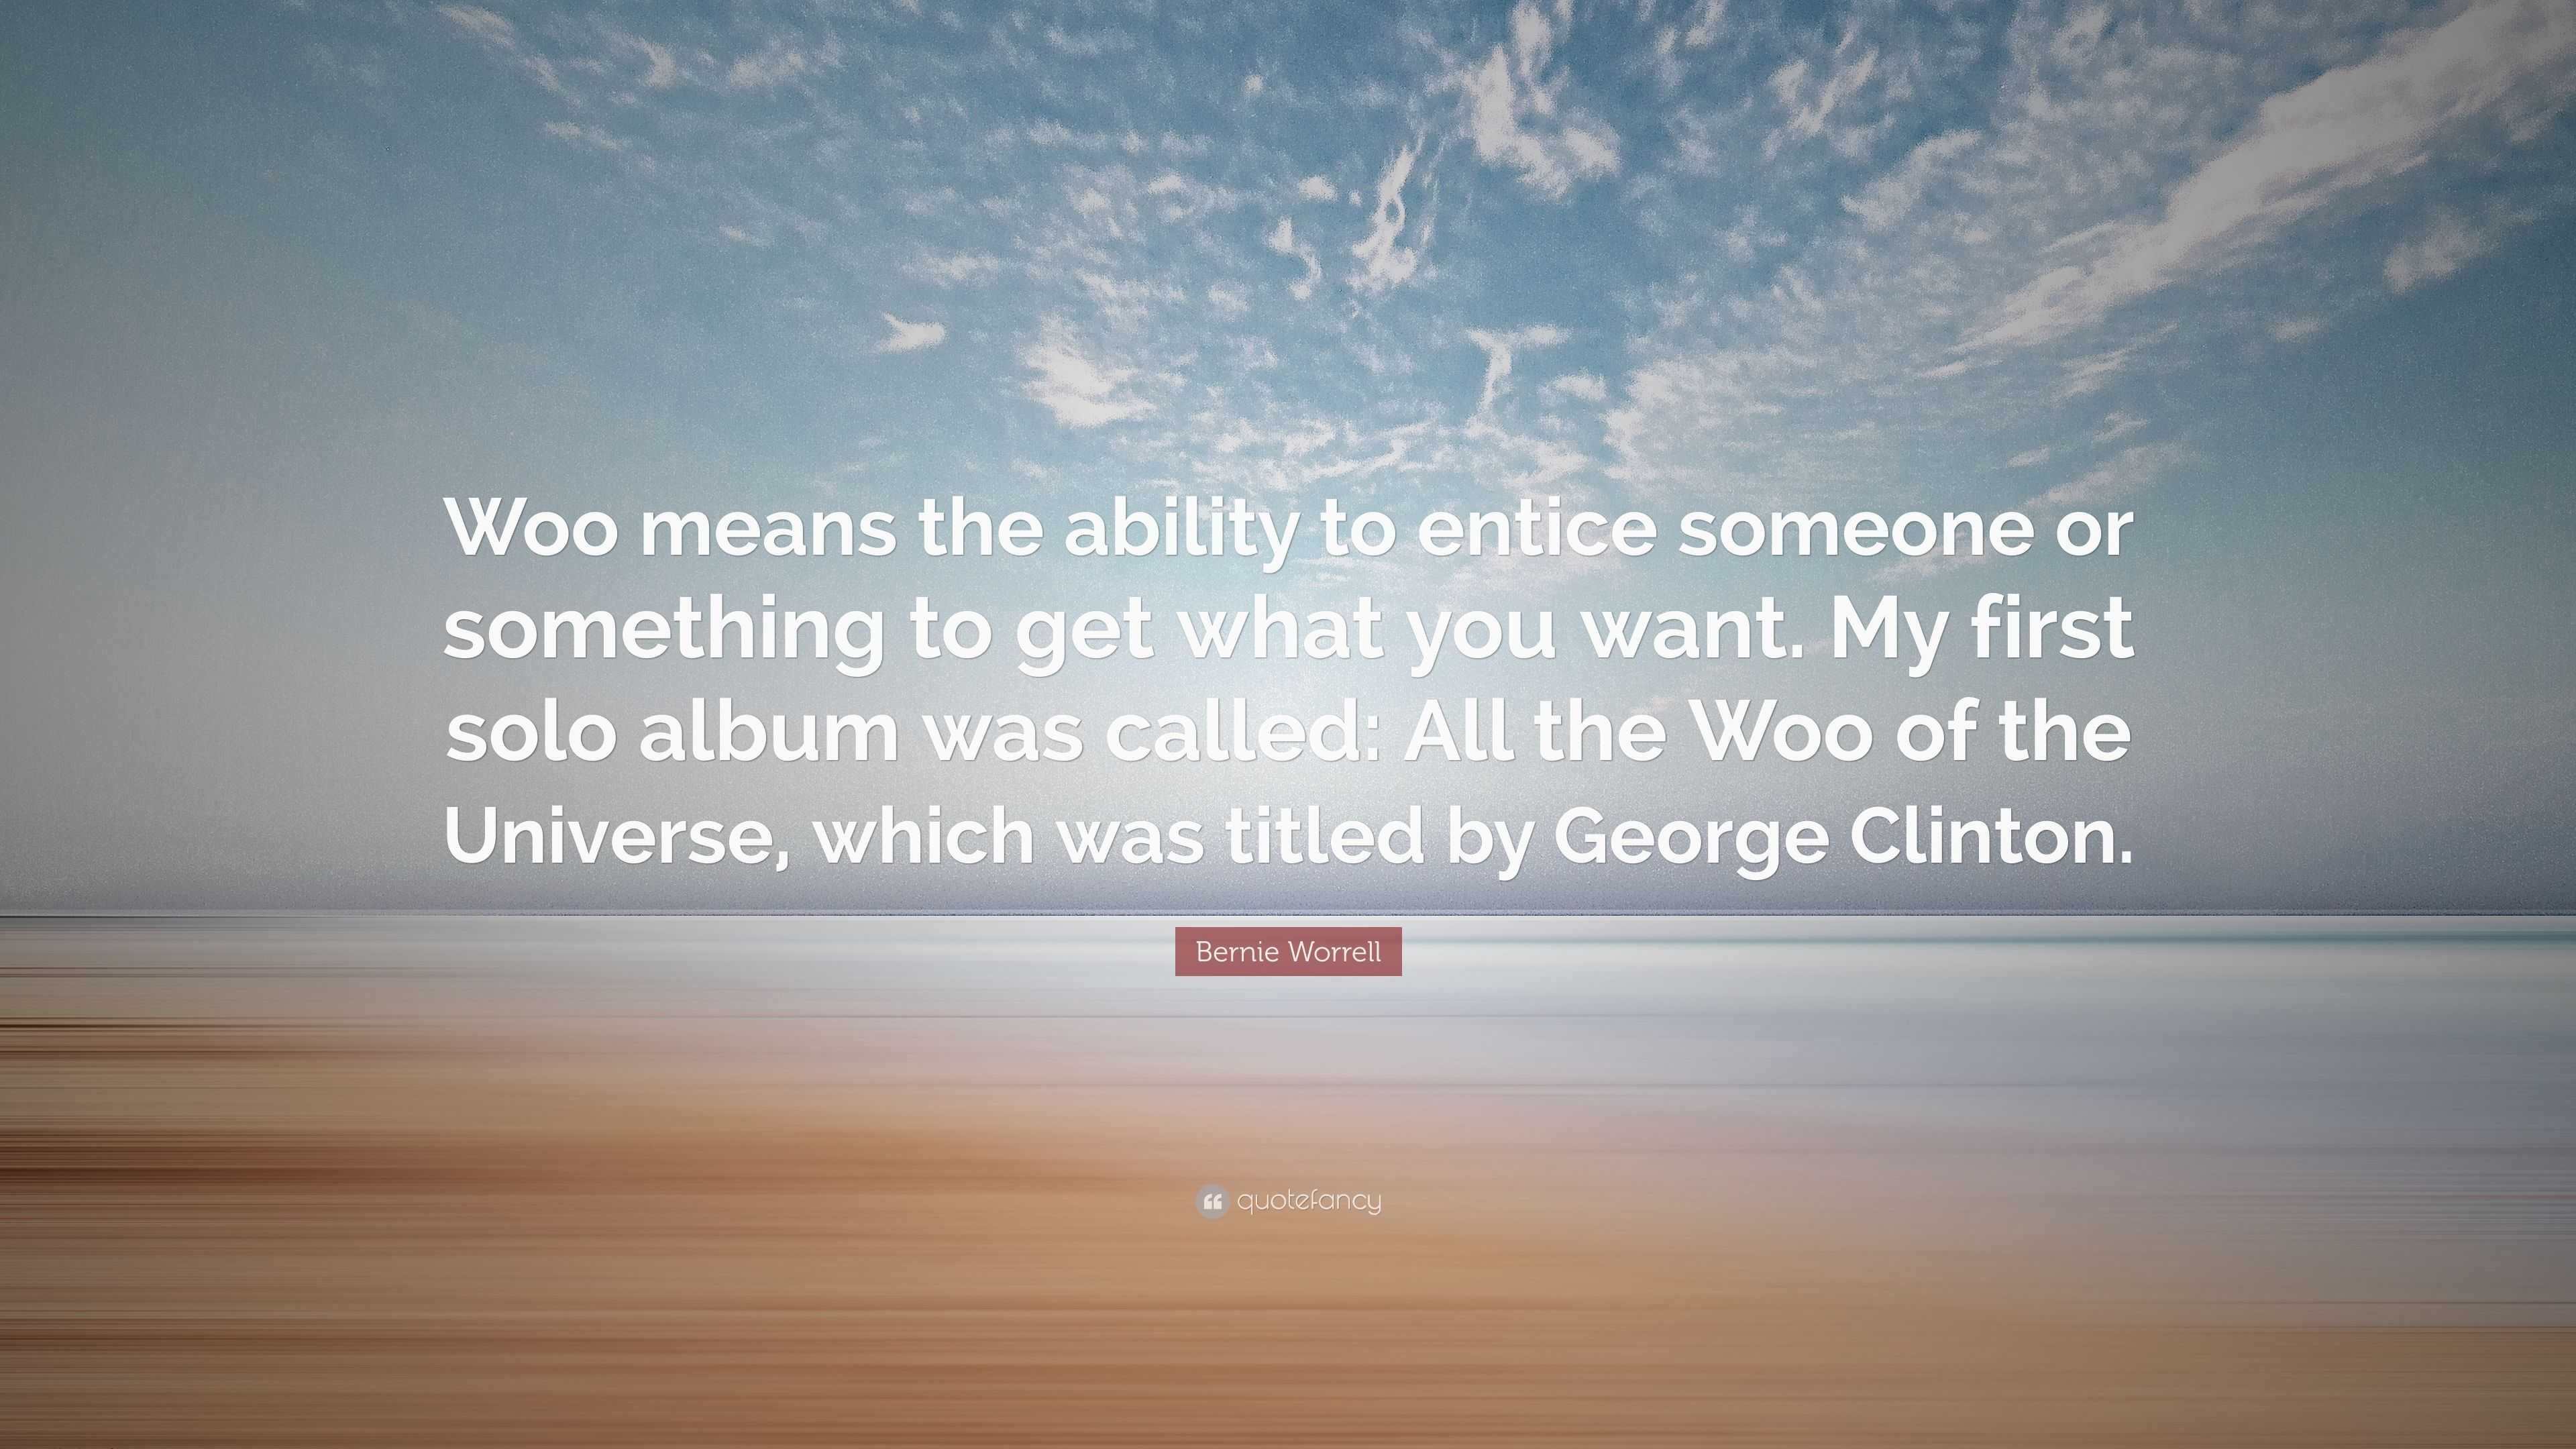 https://quotefancy.com/media/wallpaper/3840x2160/6344140-Bernie-Worrell-Quote-Woo-means-the-ability-to-entice-someone-or.jpg